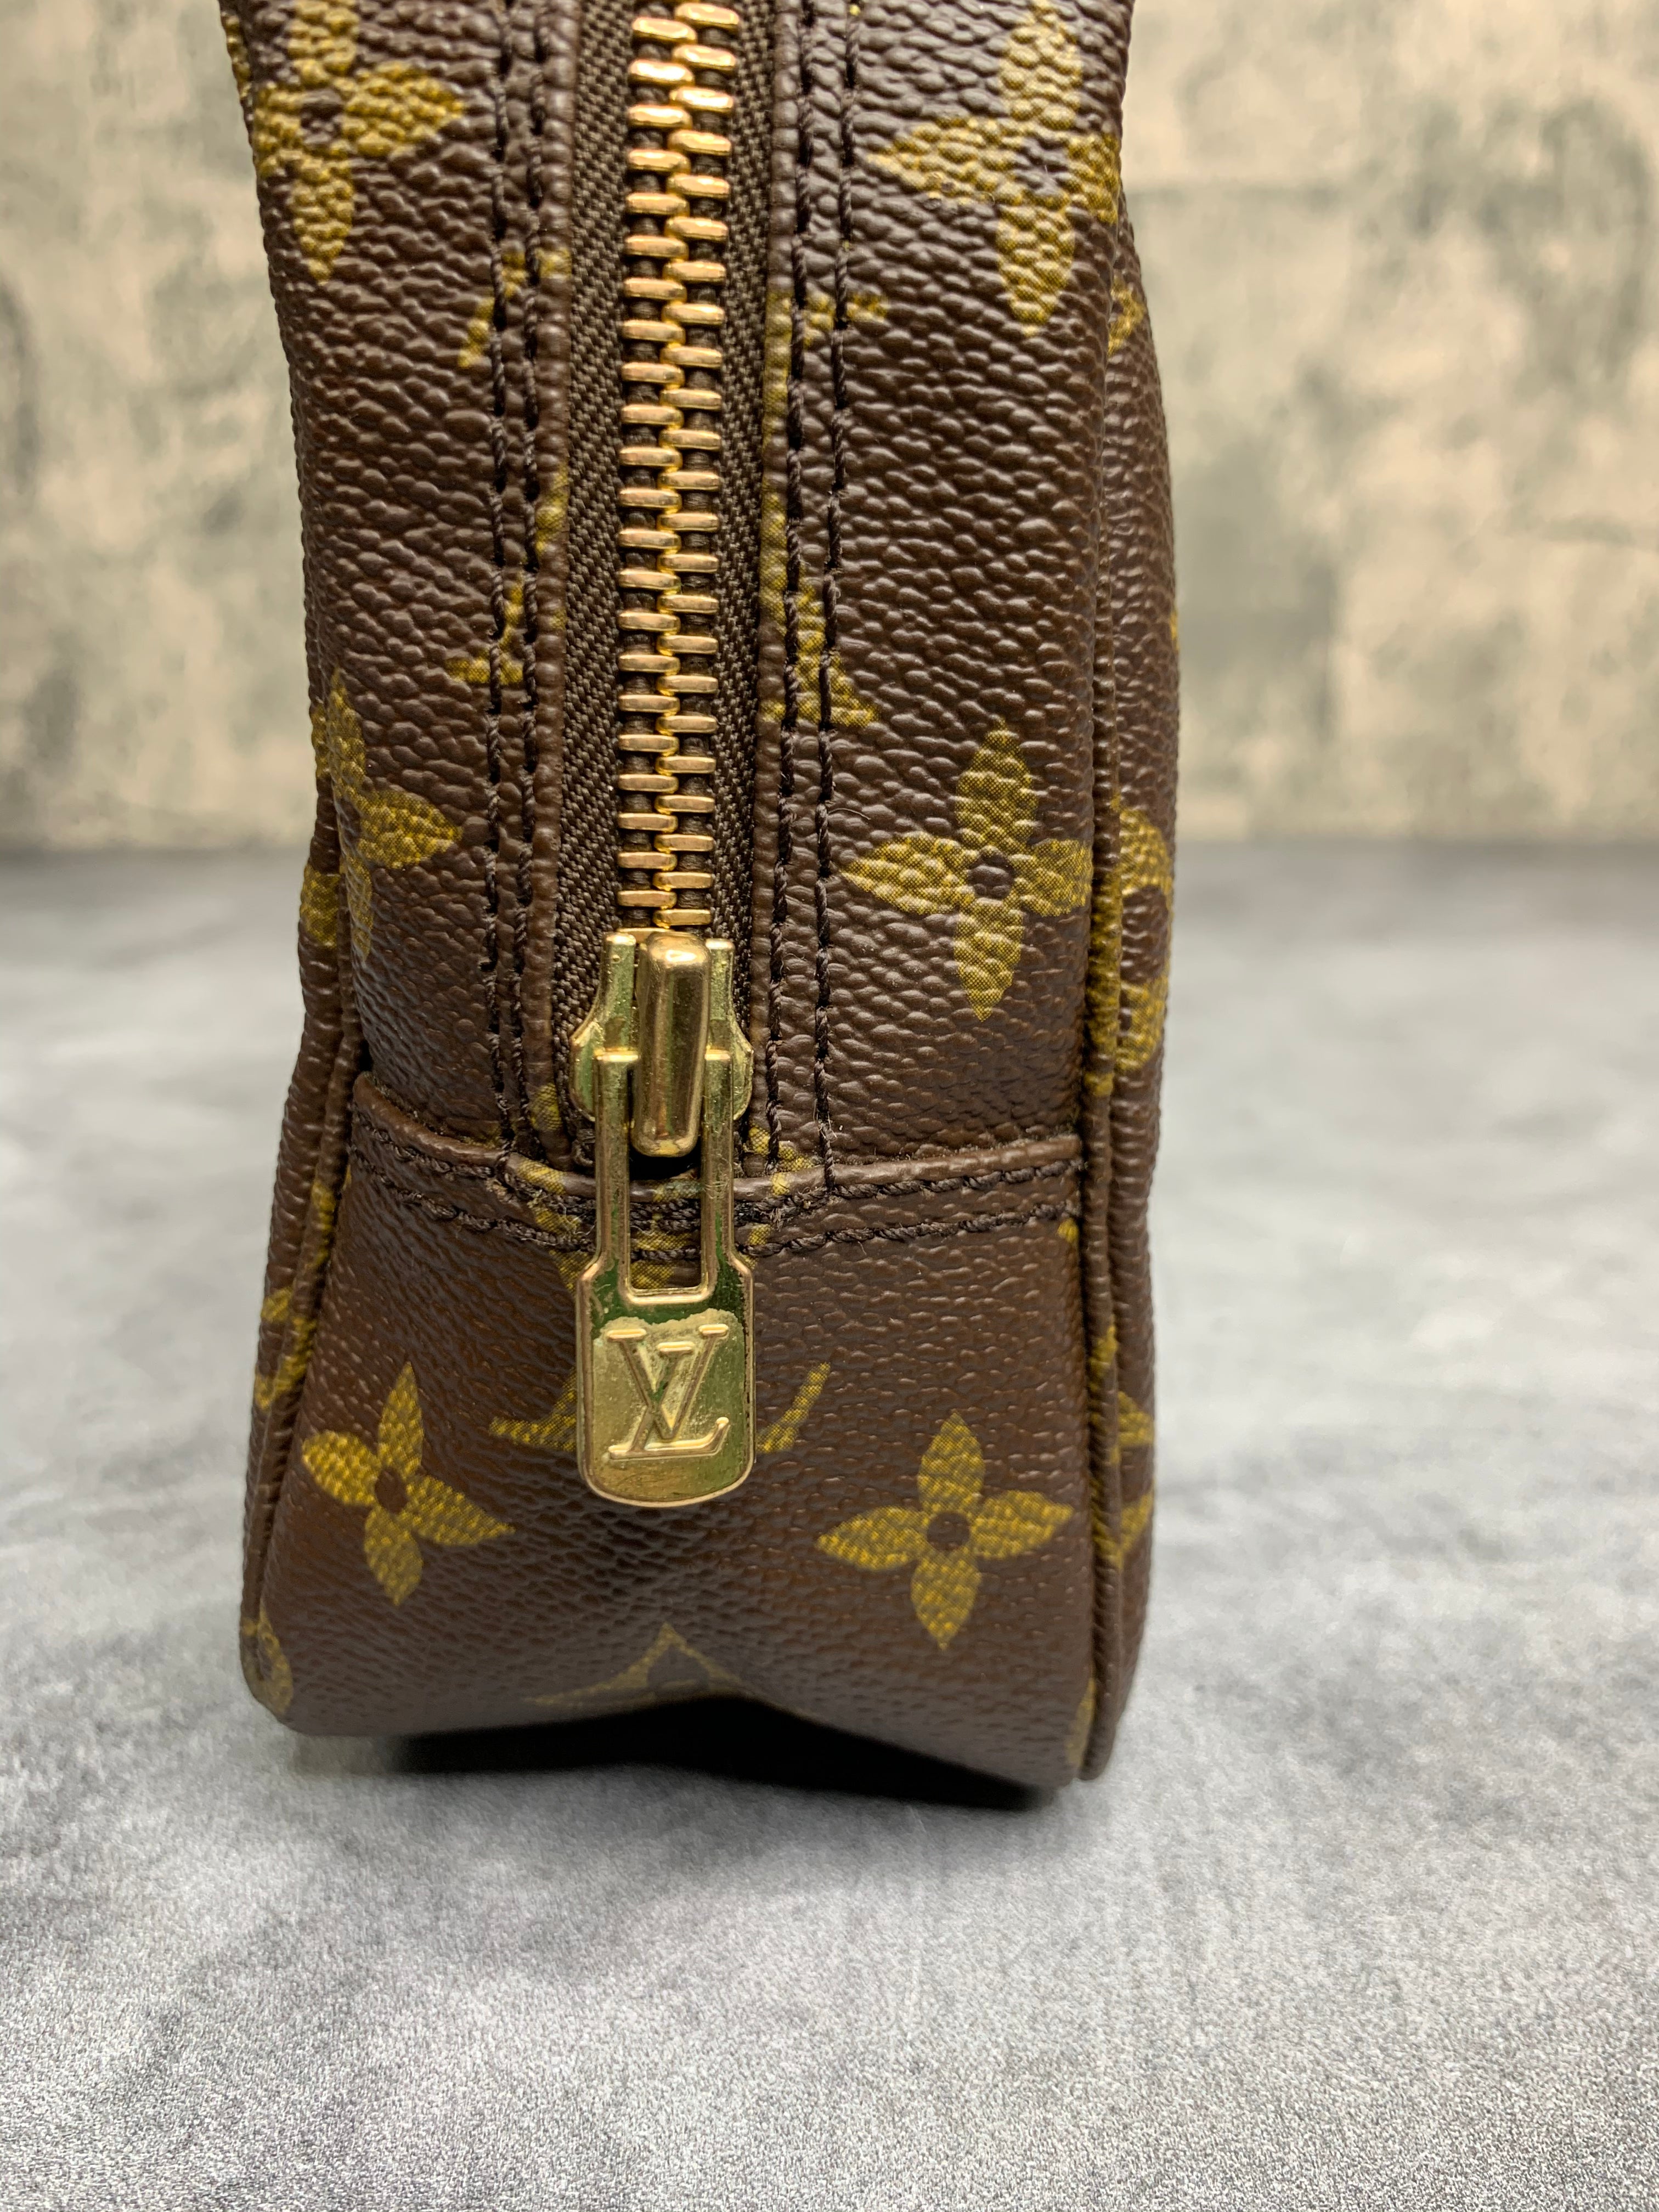 Louis Vuitton Monogram Canvas Truth Toiletry 23 - What Goes Around Comes  Around